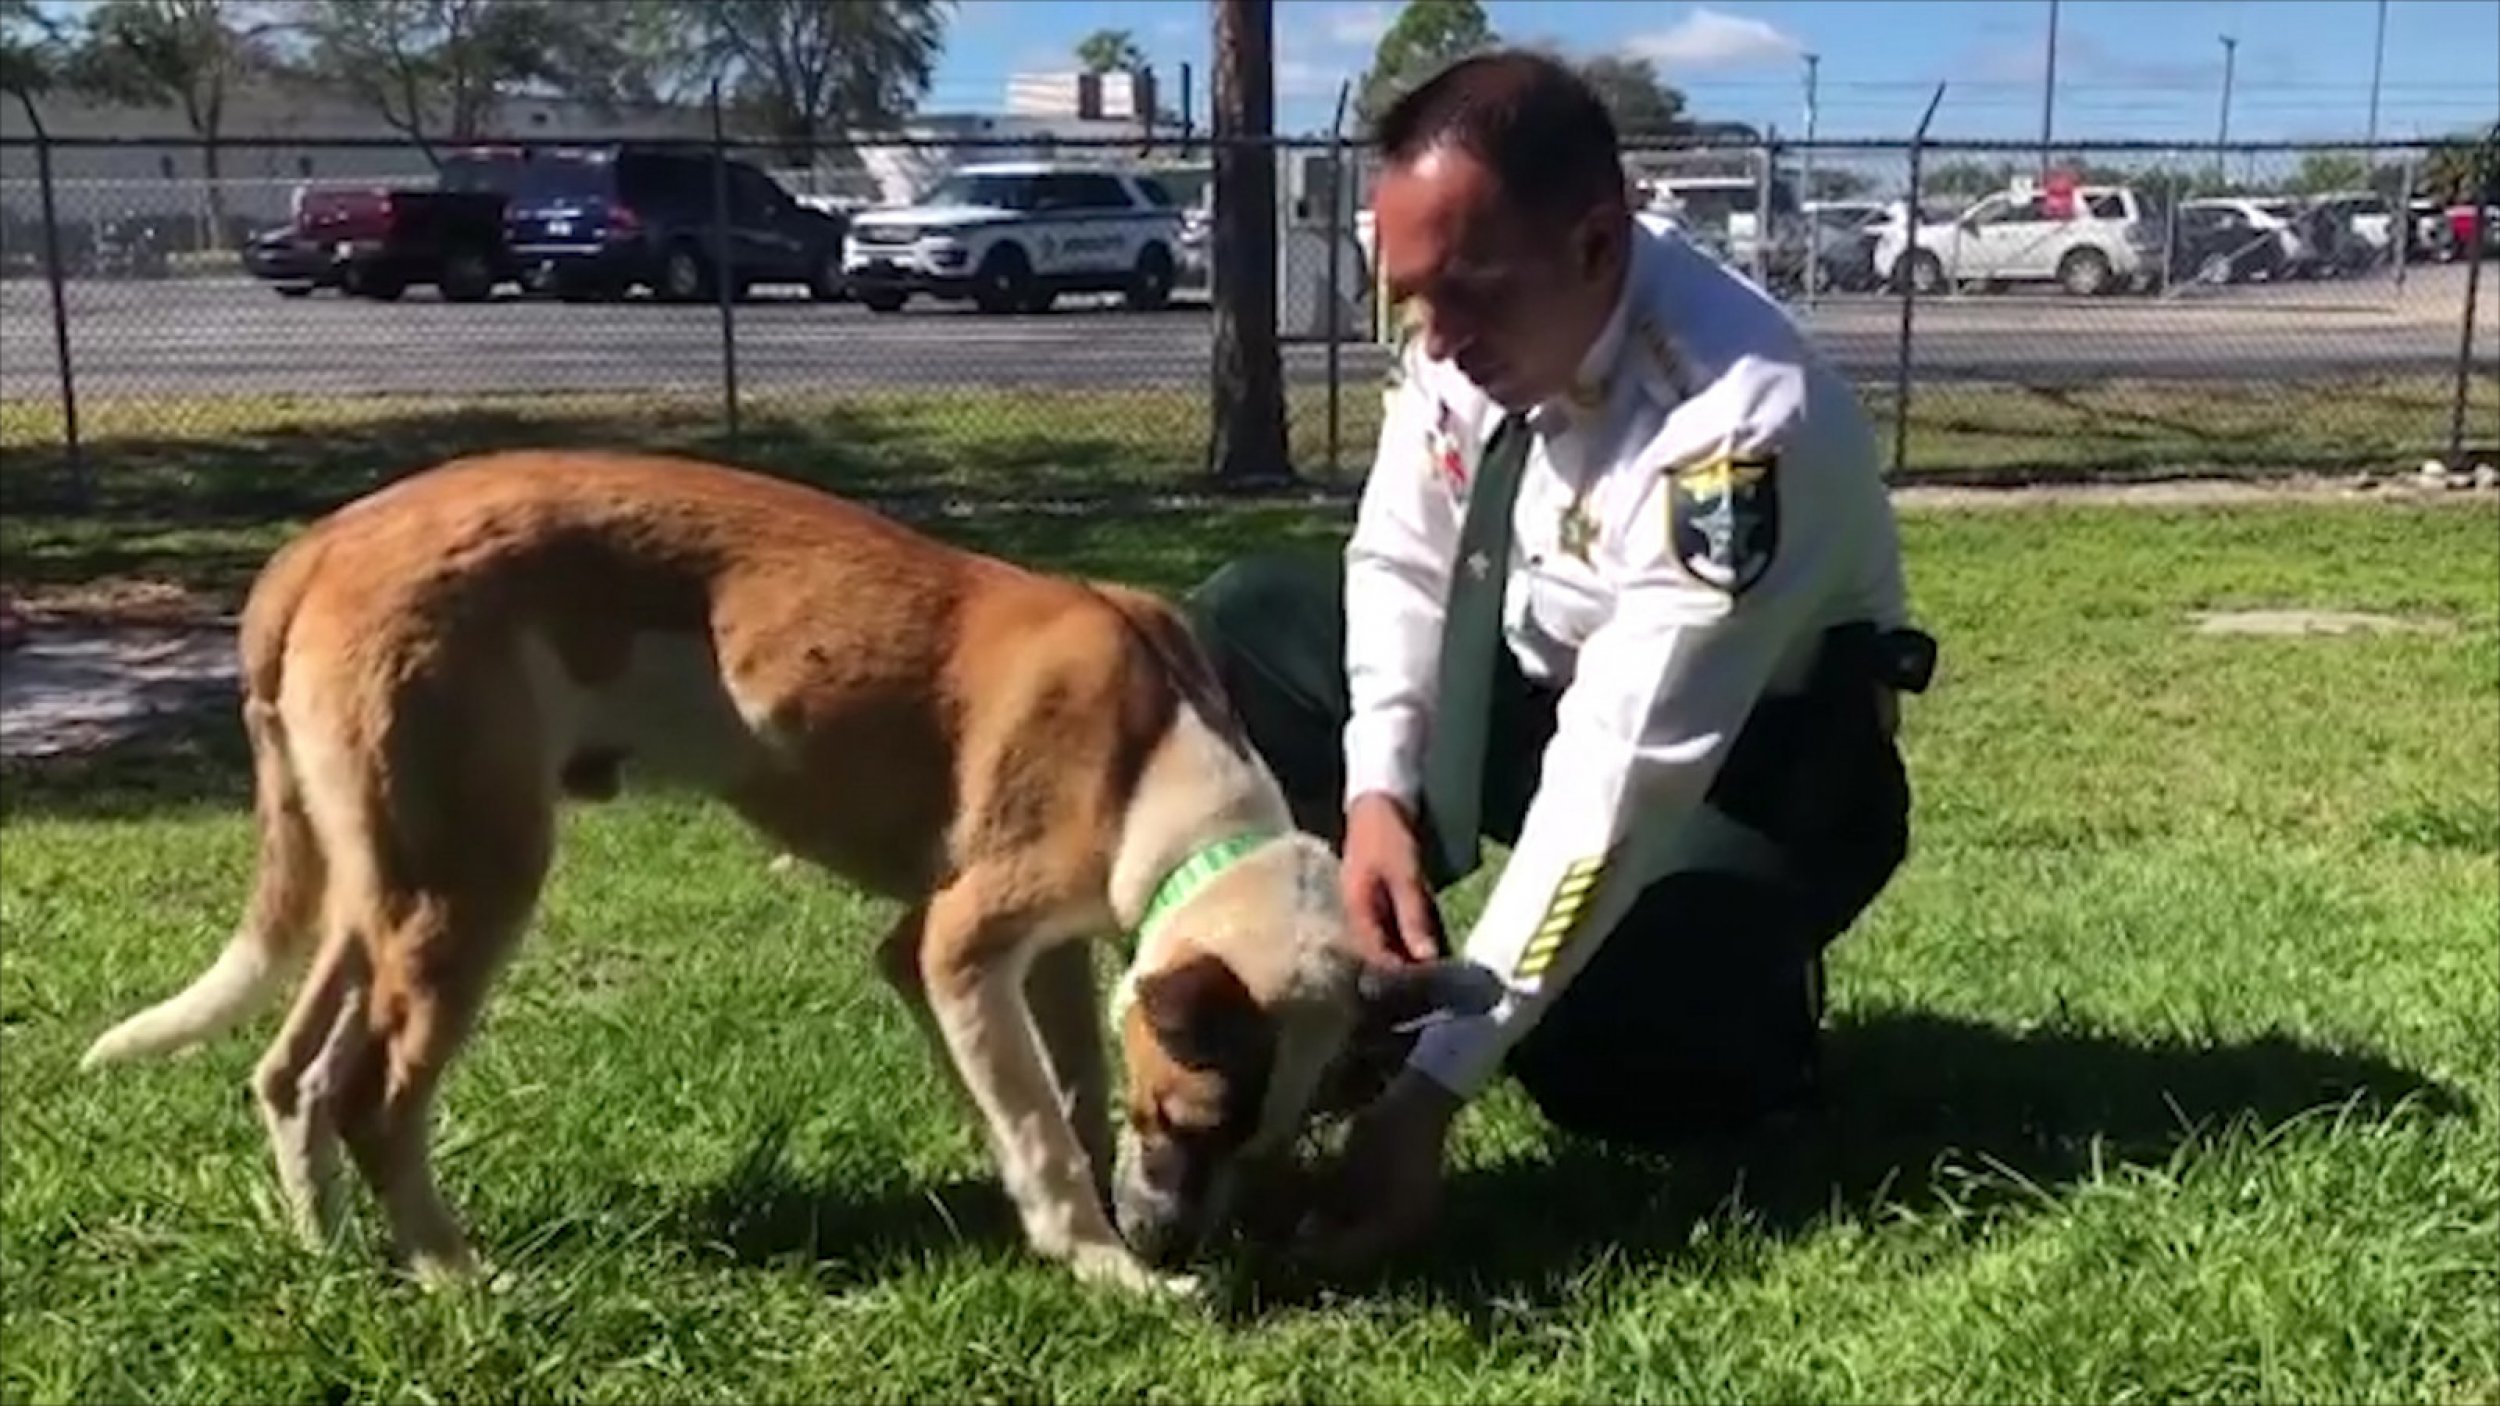 Lee County Sheriff Says He Will Not Tolerate Animal Cruelty